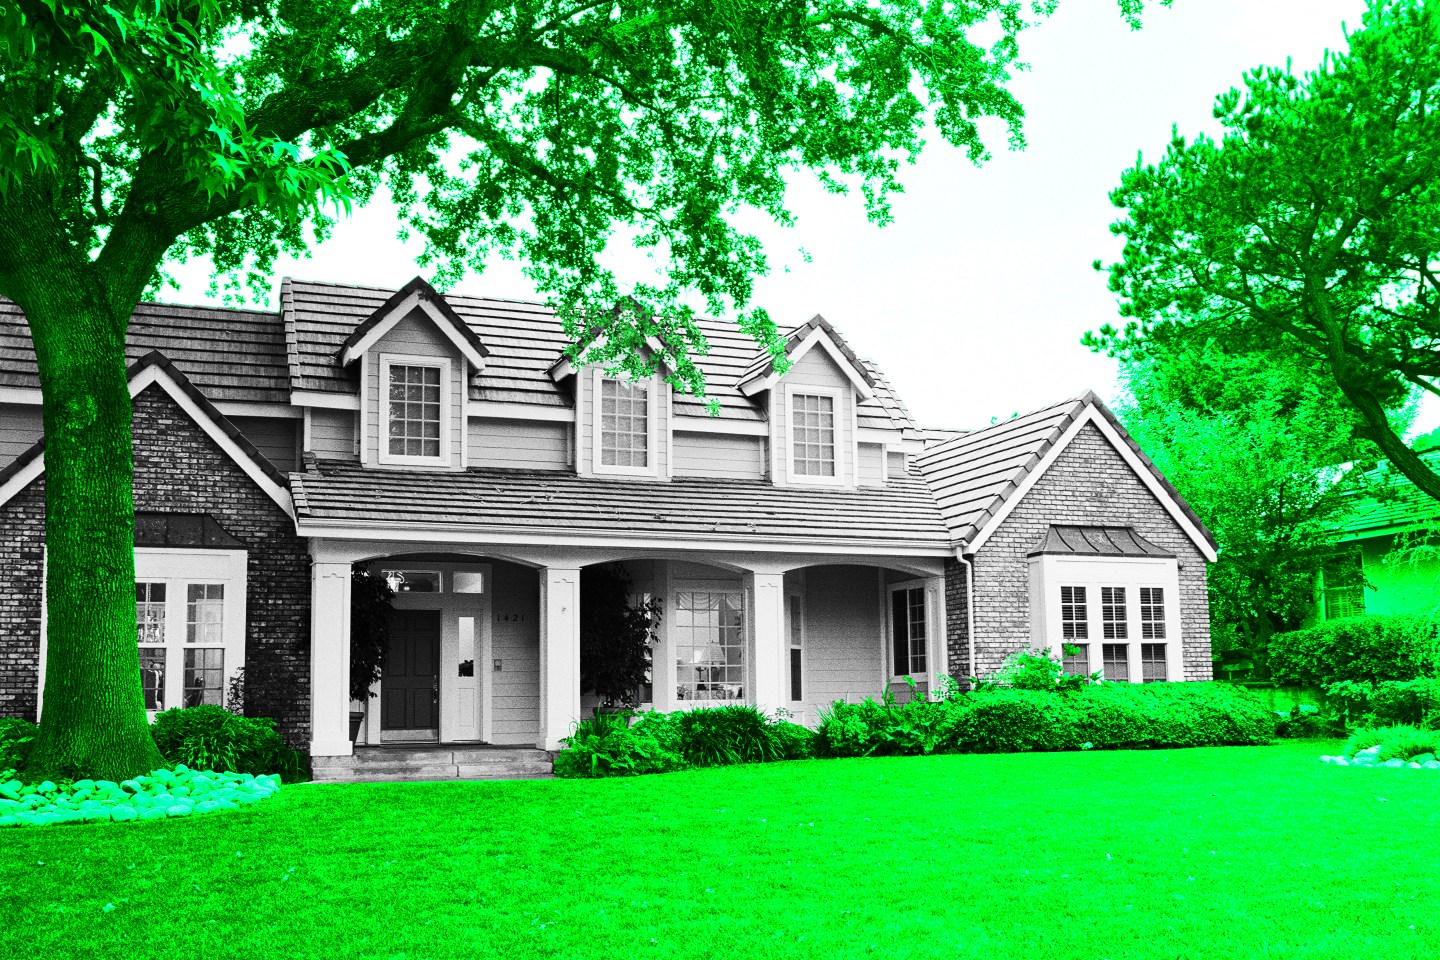 Photo illustration of a home surrounded by a bright green yard and trees.